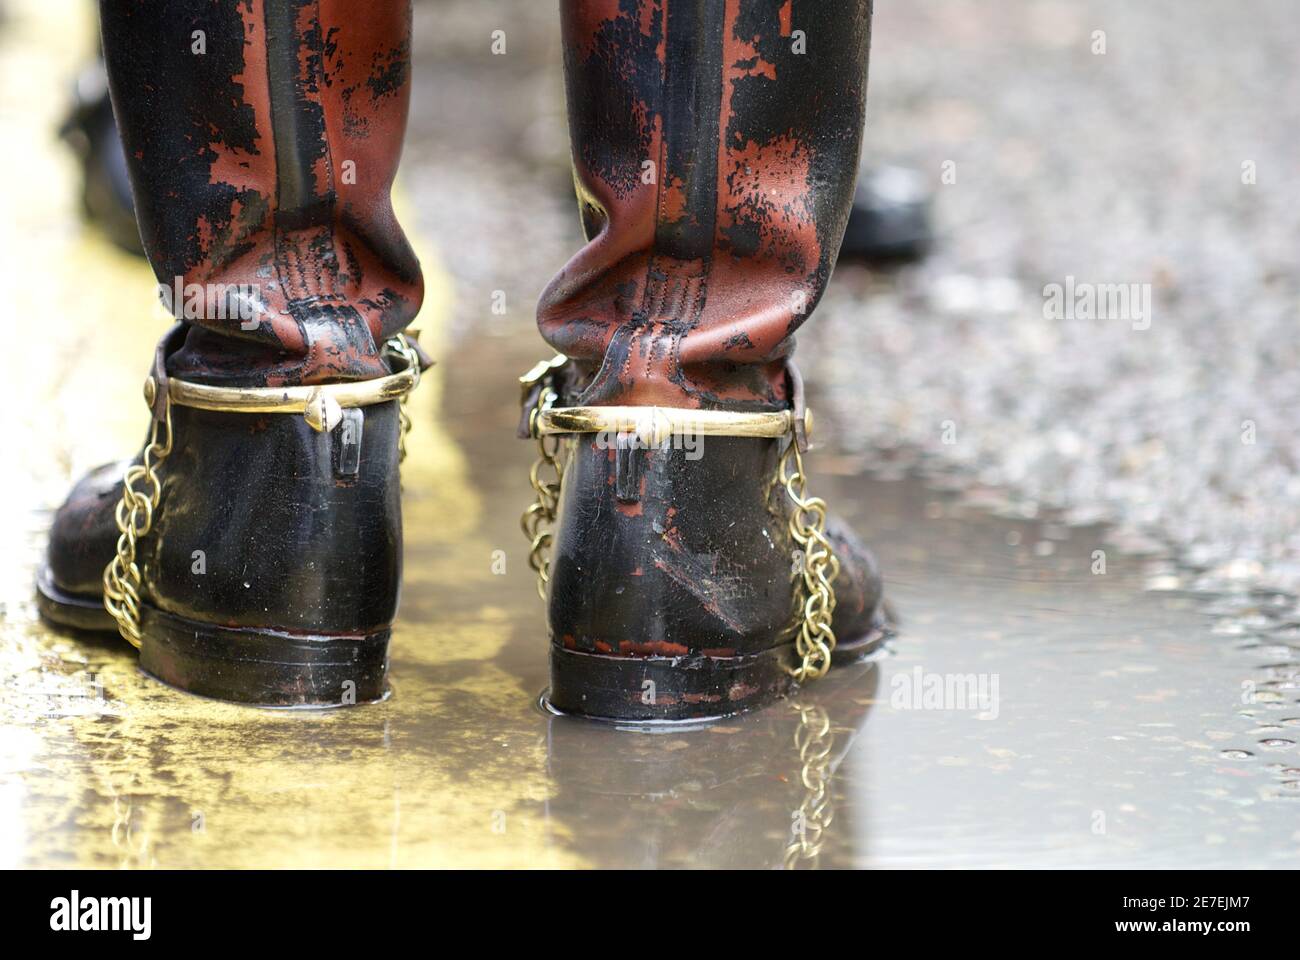 Boots of Bravery: Firefighter's Heroic Journey Captured During an Intense Operation Stock Photo